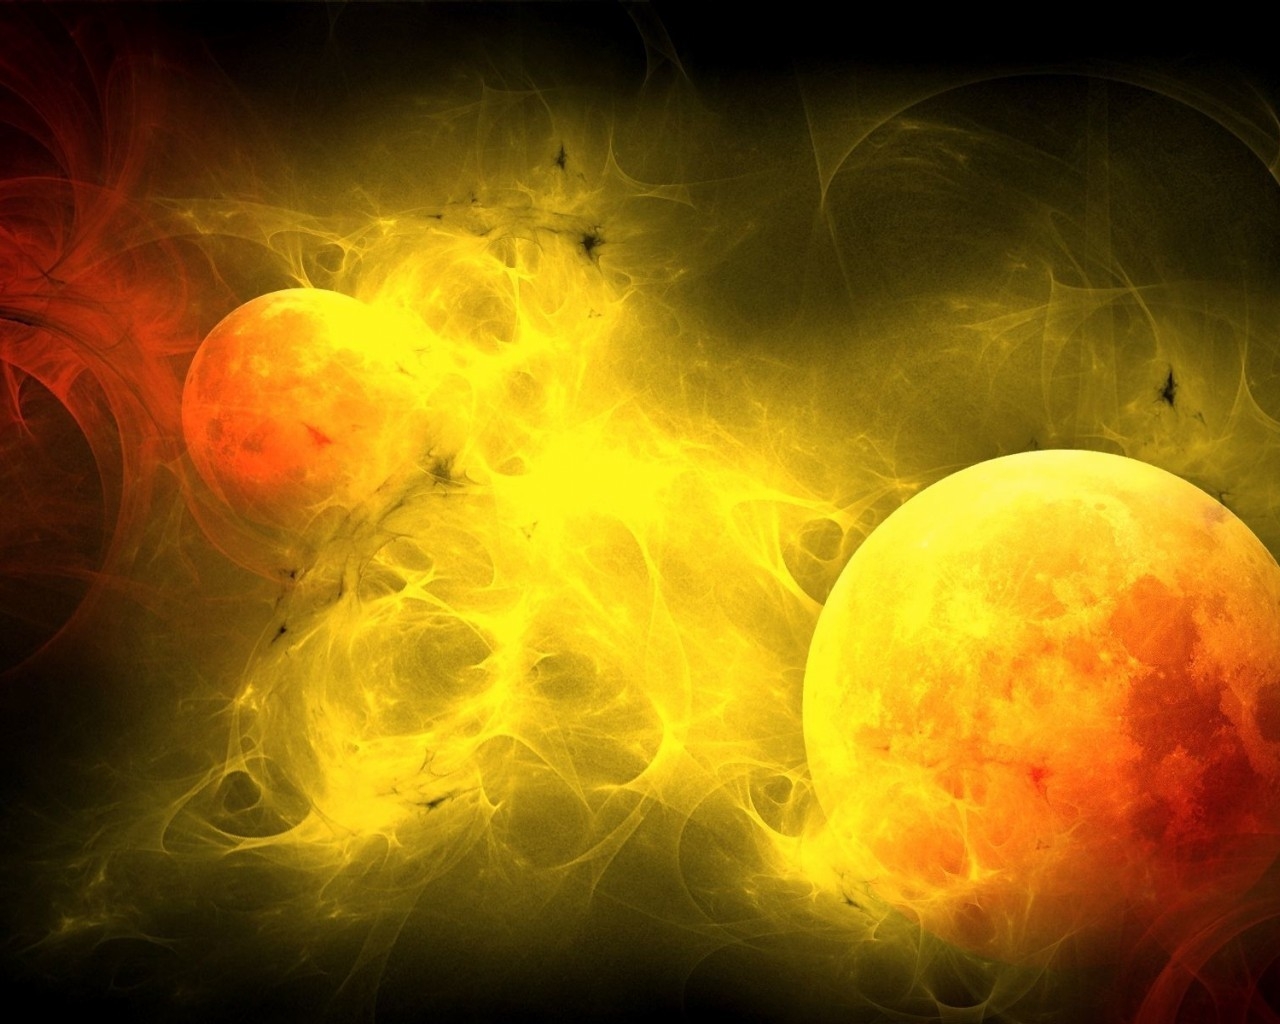 Fire Planets for 1280 x 1024 resolution